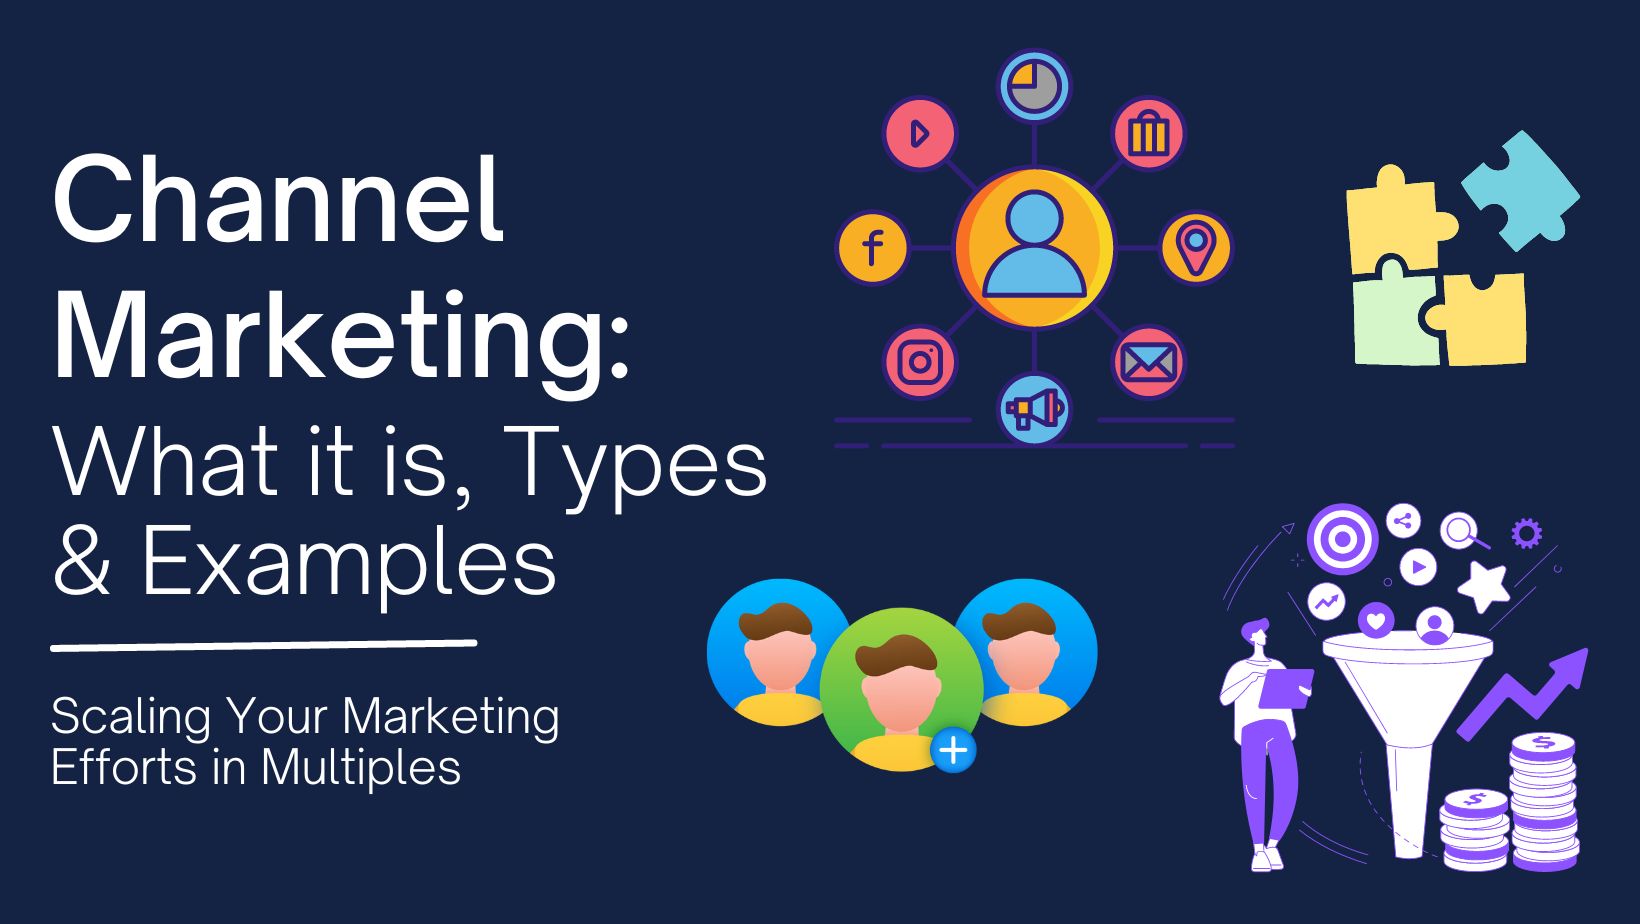 Channel Marketing: What it is, Types & Examples